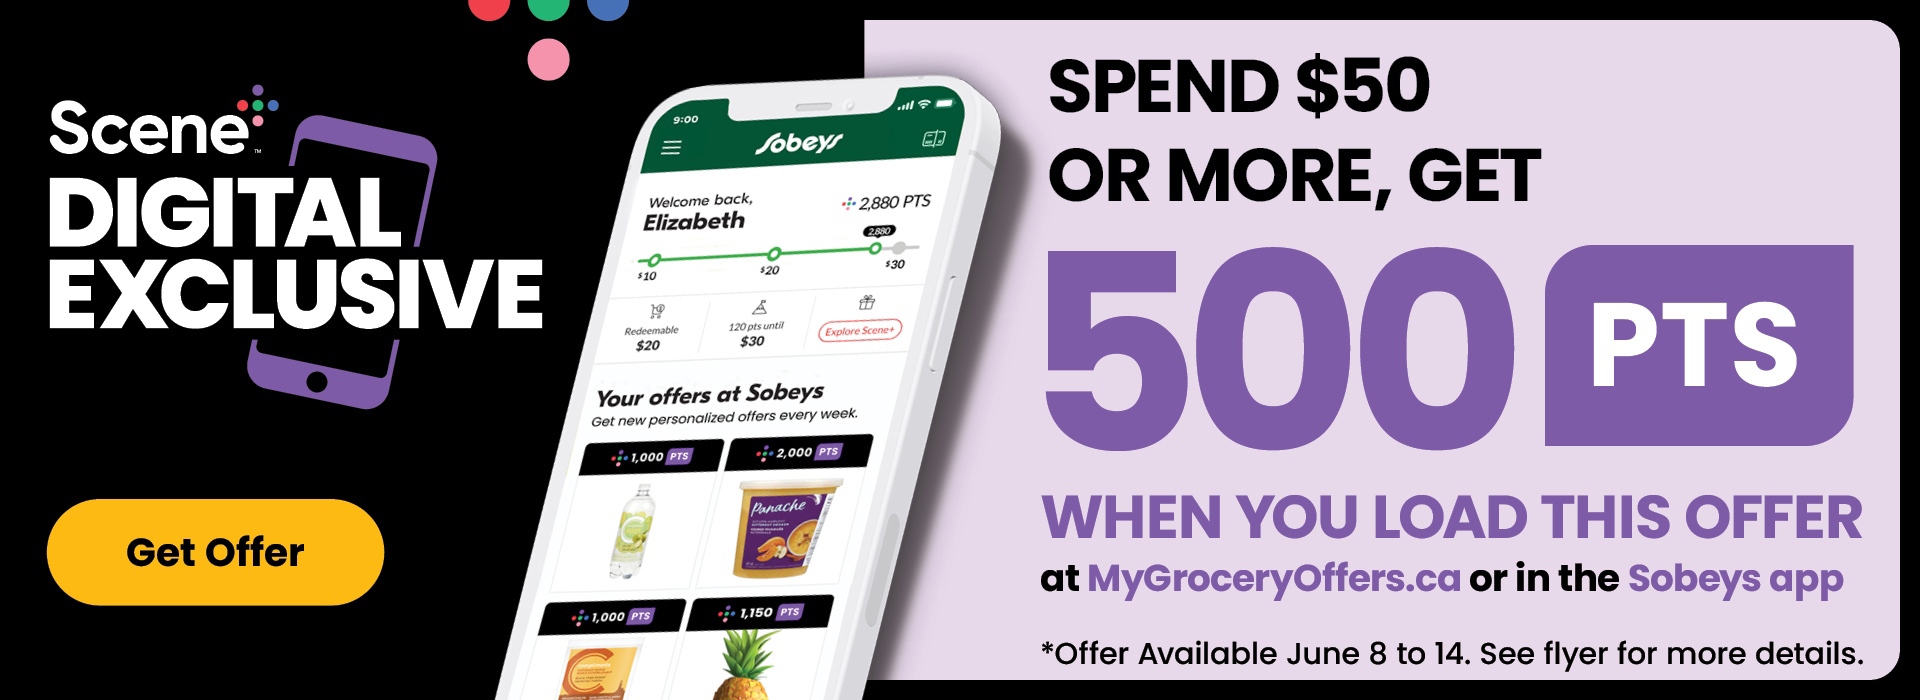 Scene+ Digital Exclusive Offer. Spend $50 or more, get 500 PTS when you load this offer at MyGroceryoffers,ca or in the Sobeys App